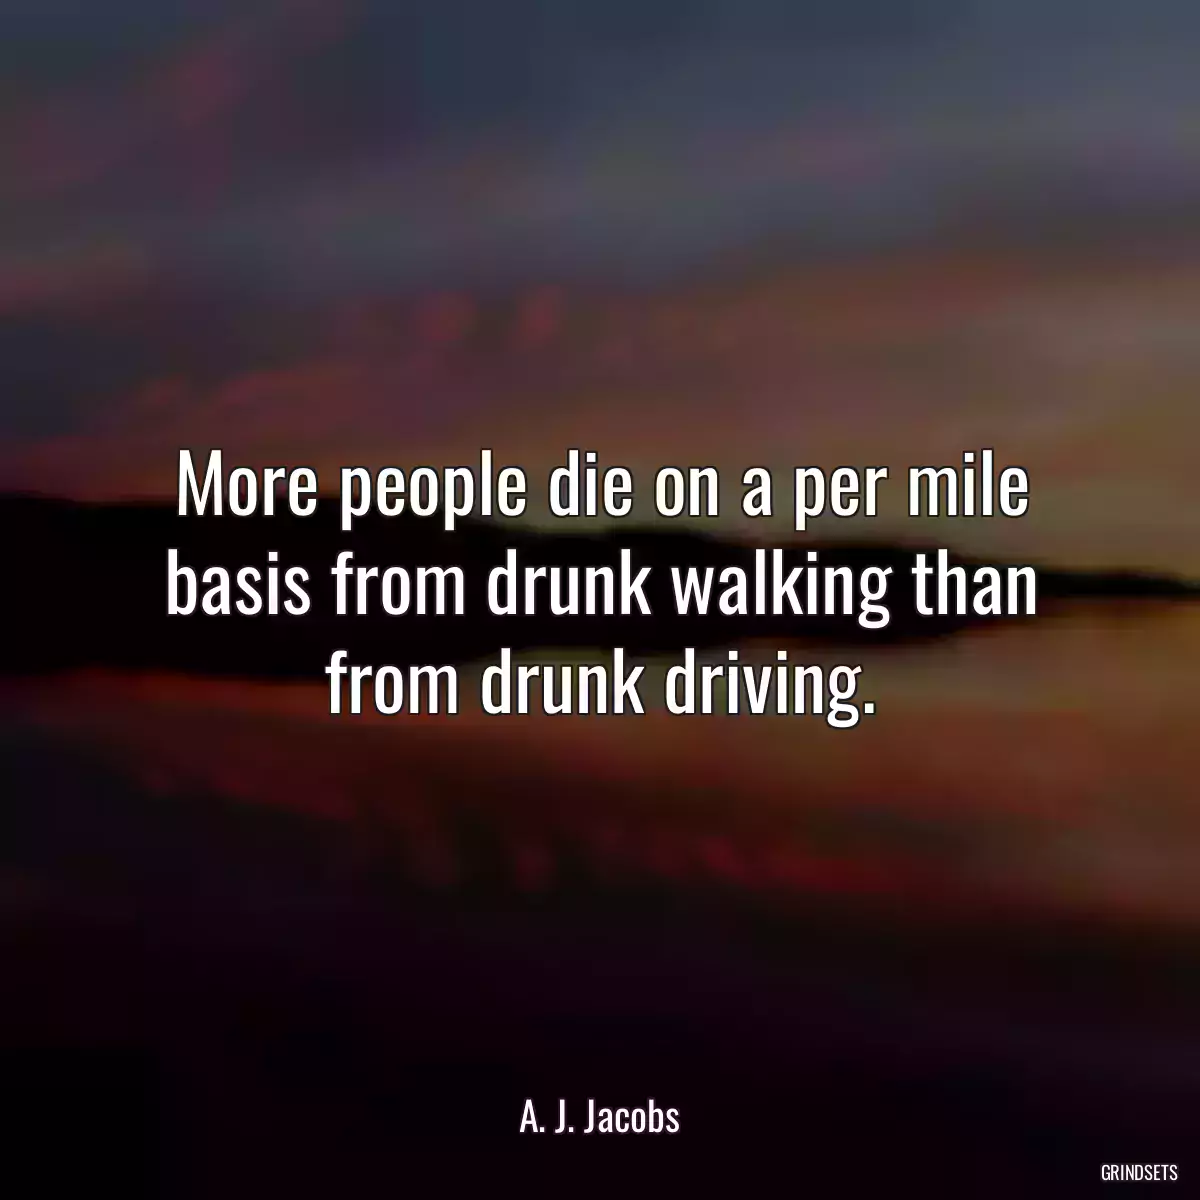 More people die on a per mile basis from drunk walking than from drunk driving.